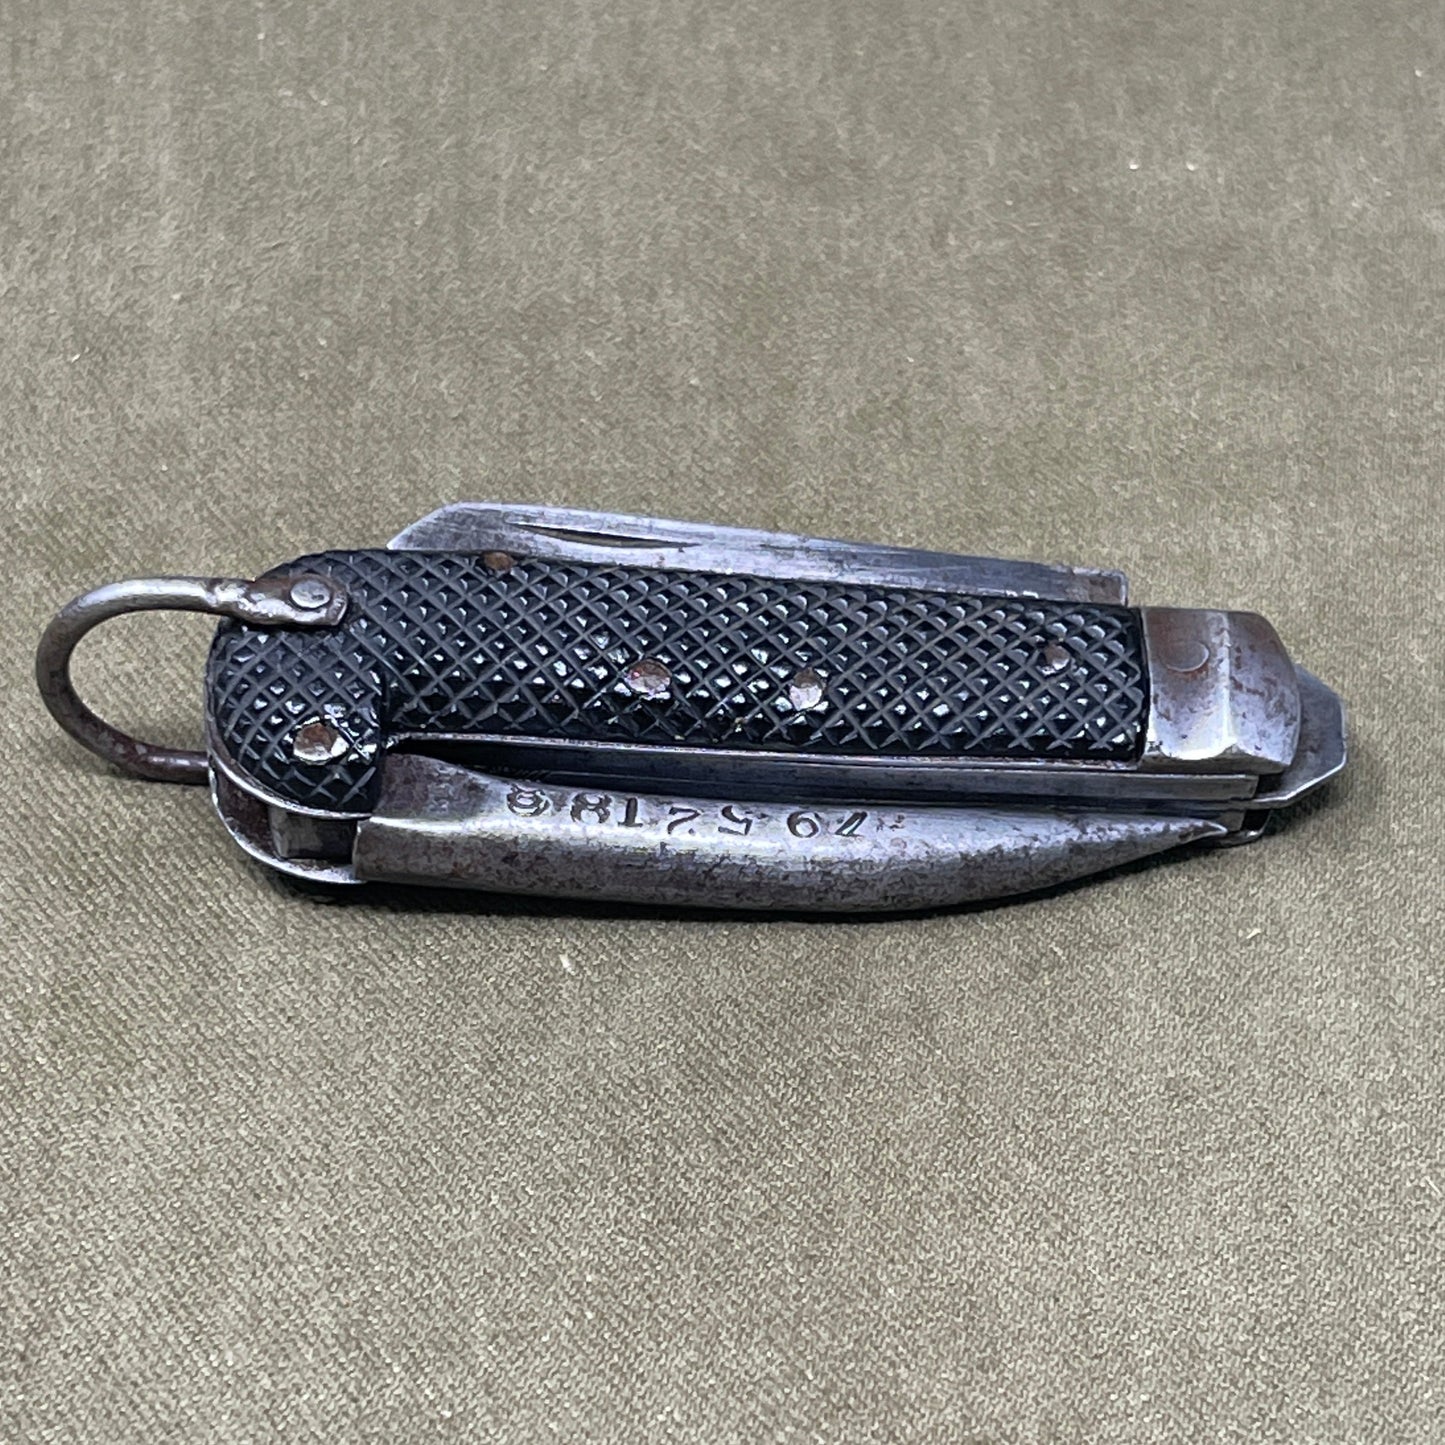 A nice example of a British 1943 Dated Pocket Jack Knife made by Humphreys Radiant of Sheffield  The blades are in good condition, the chequered Bakelite grip is intact and all the blades lock and close as they should. The steel can opener is in good condition